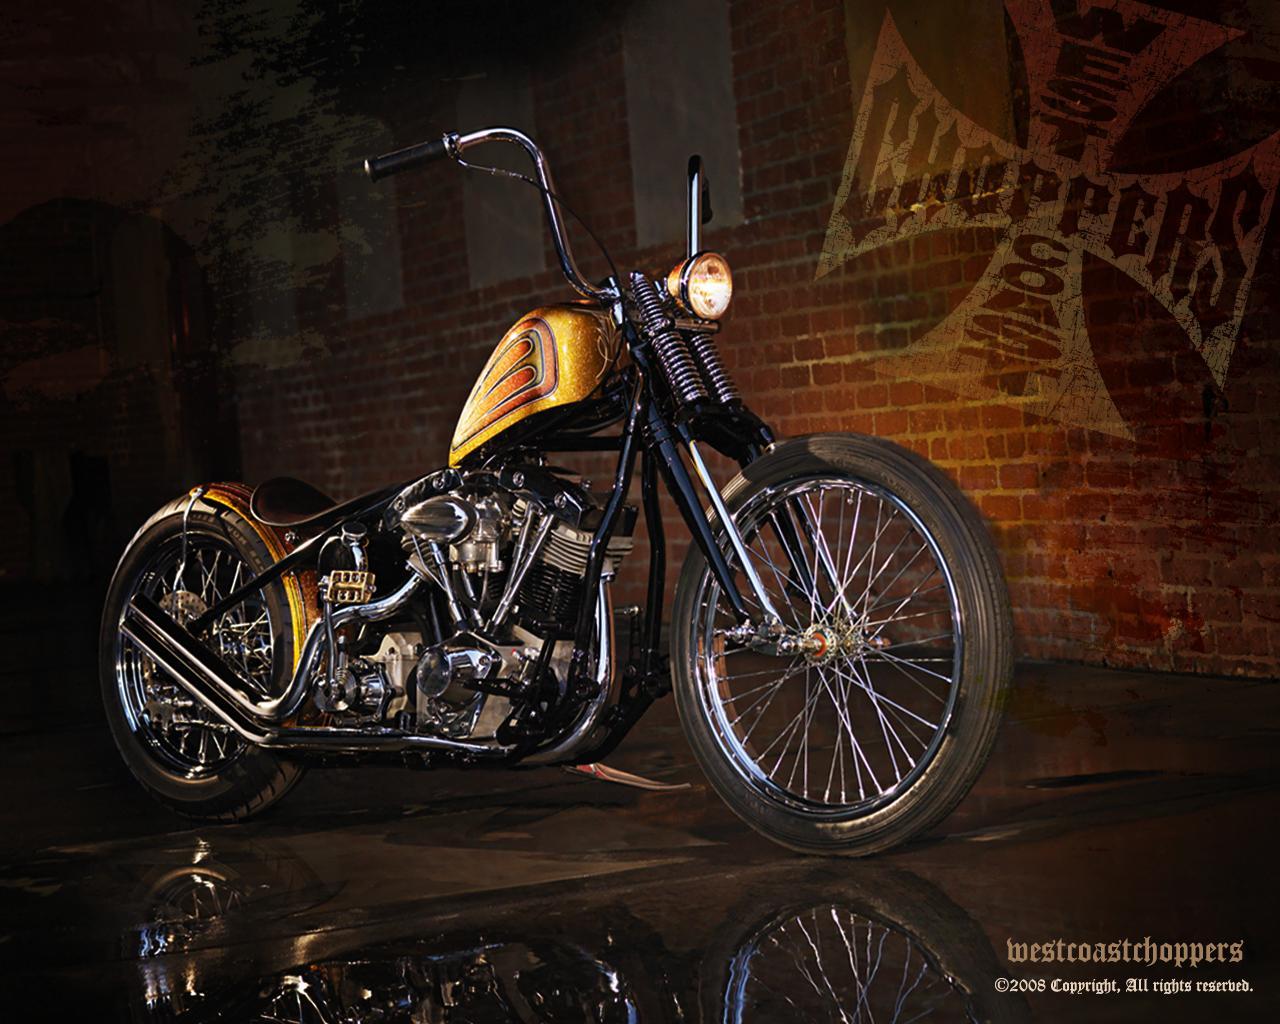 Free HD Choppers wallpaper, West Cost Choppers theme bikes